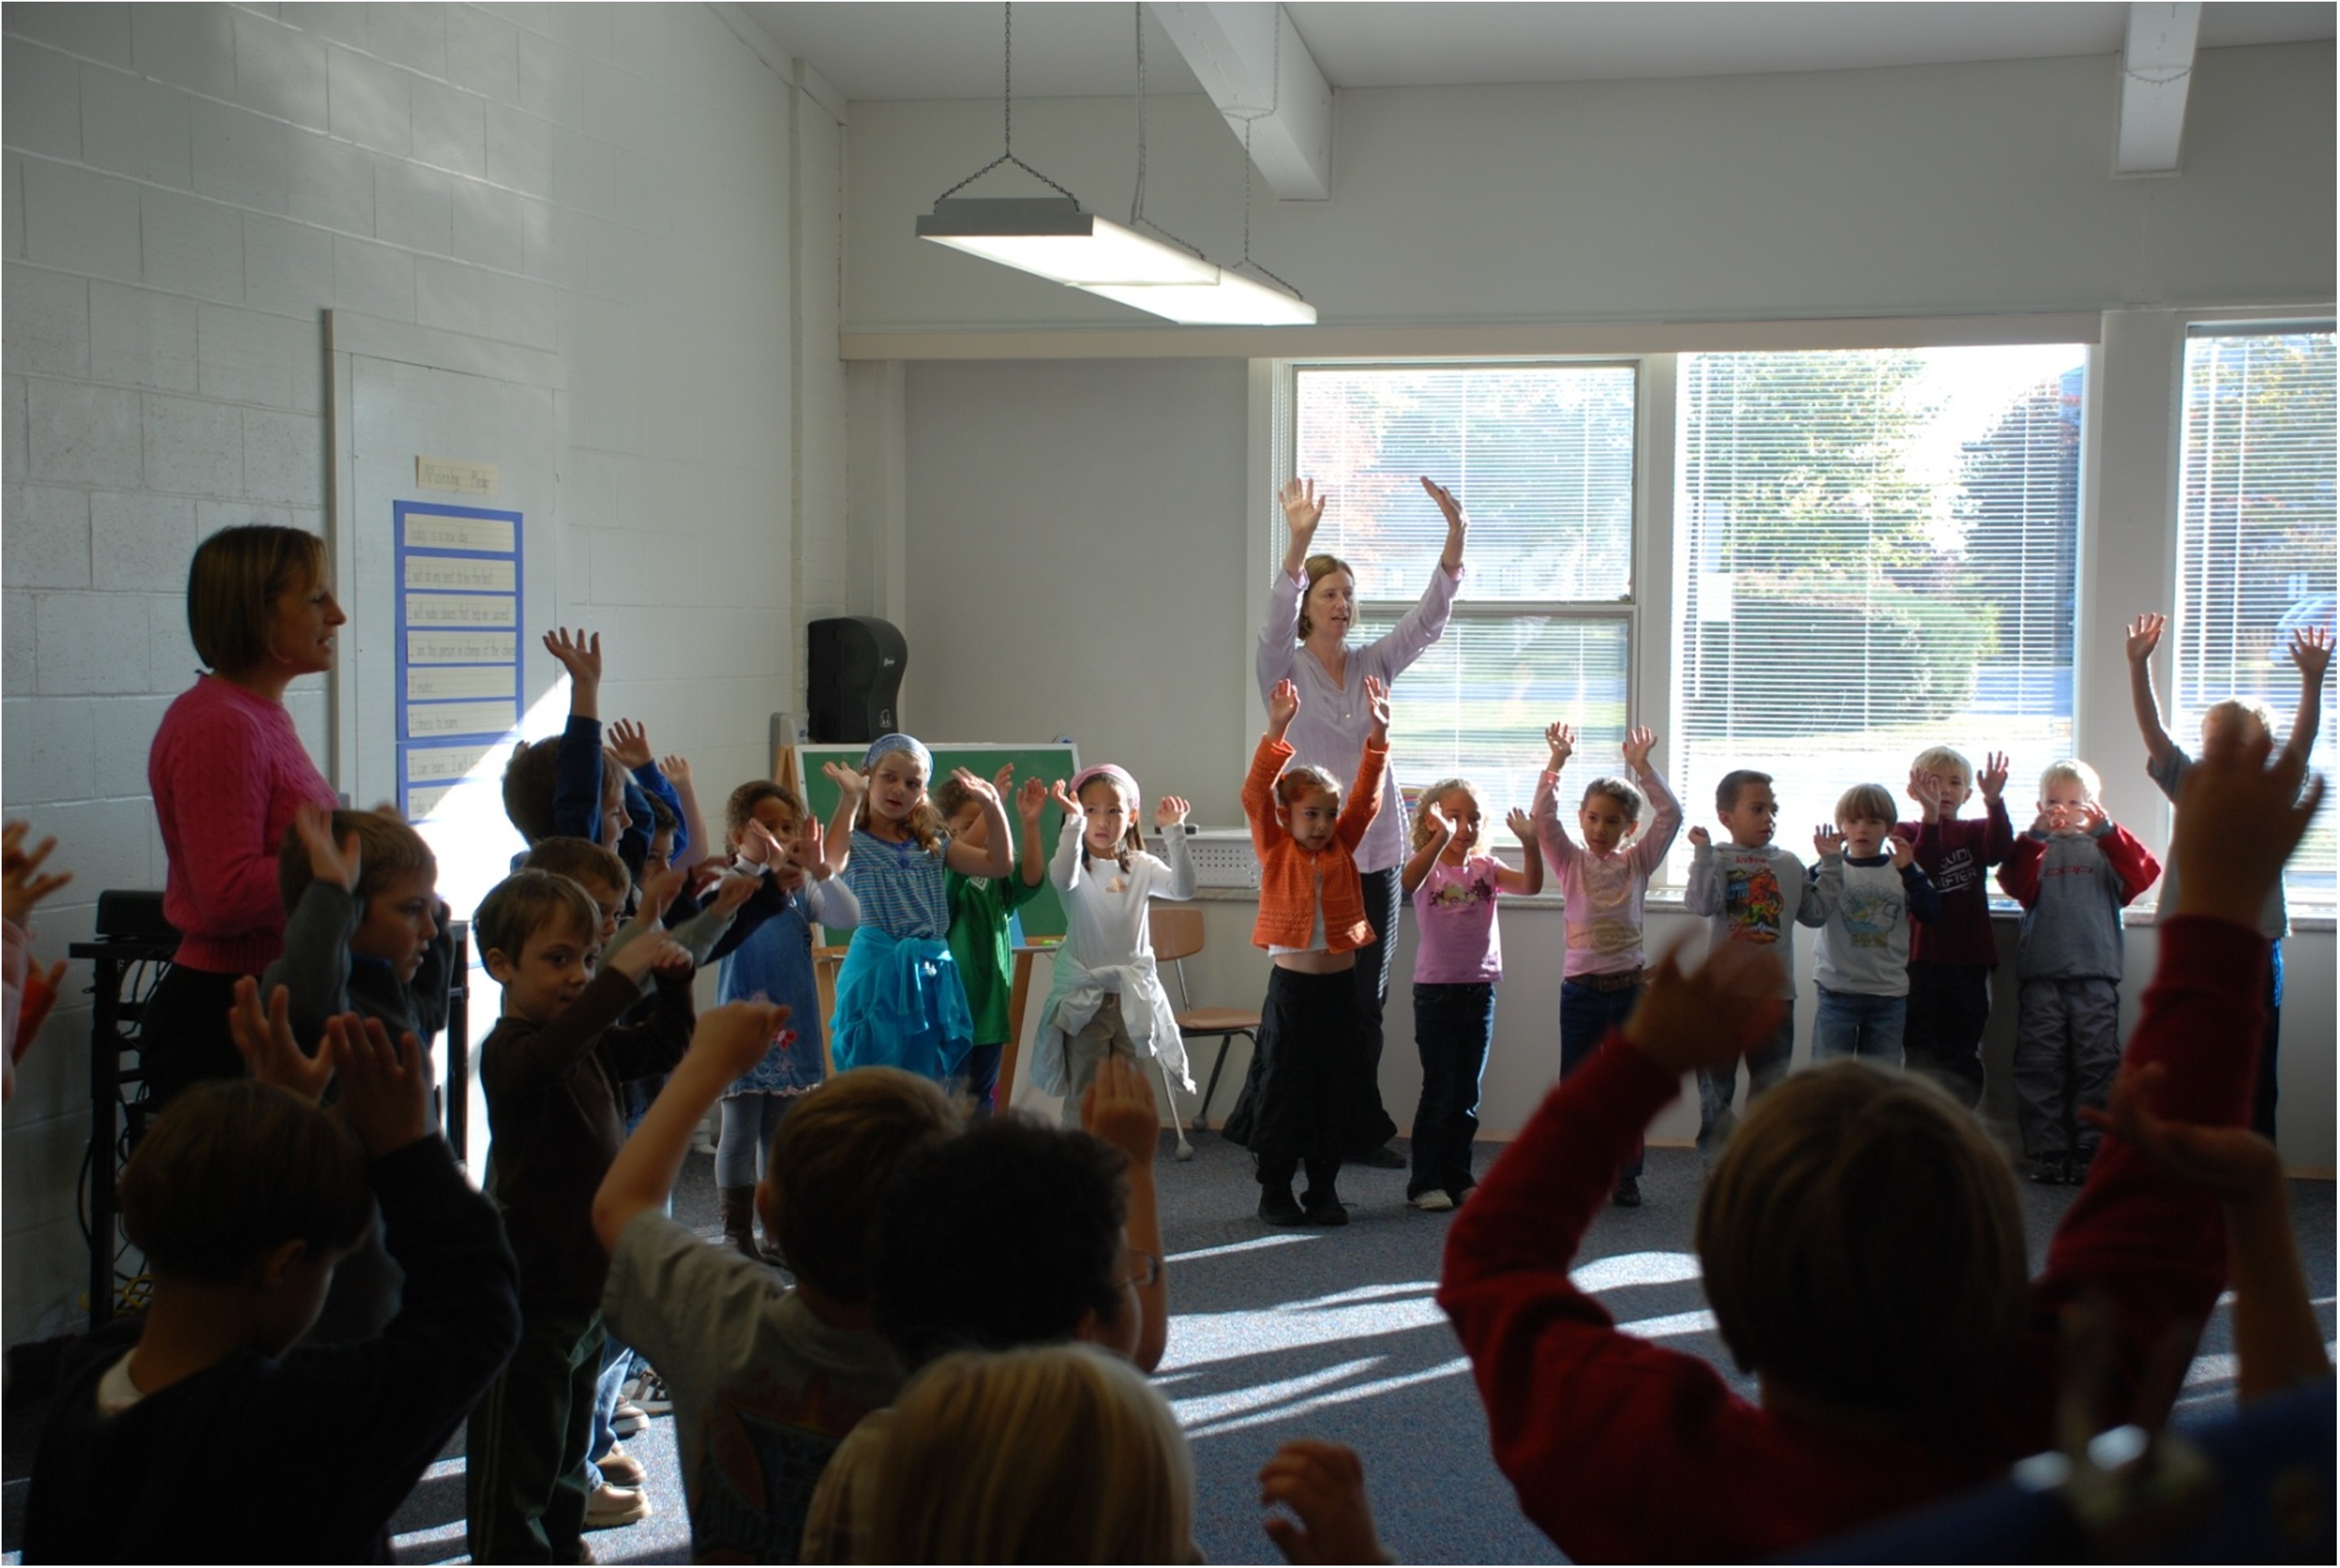 A photo of a class with kids standing up making an exercise.